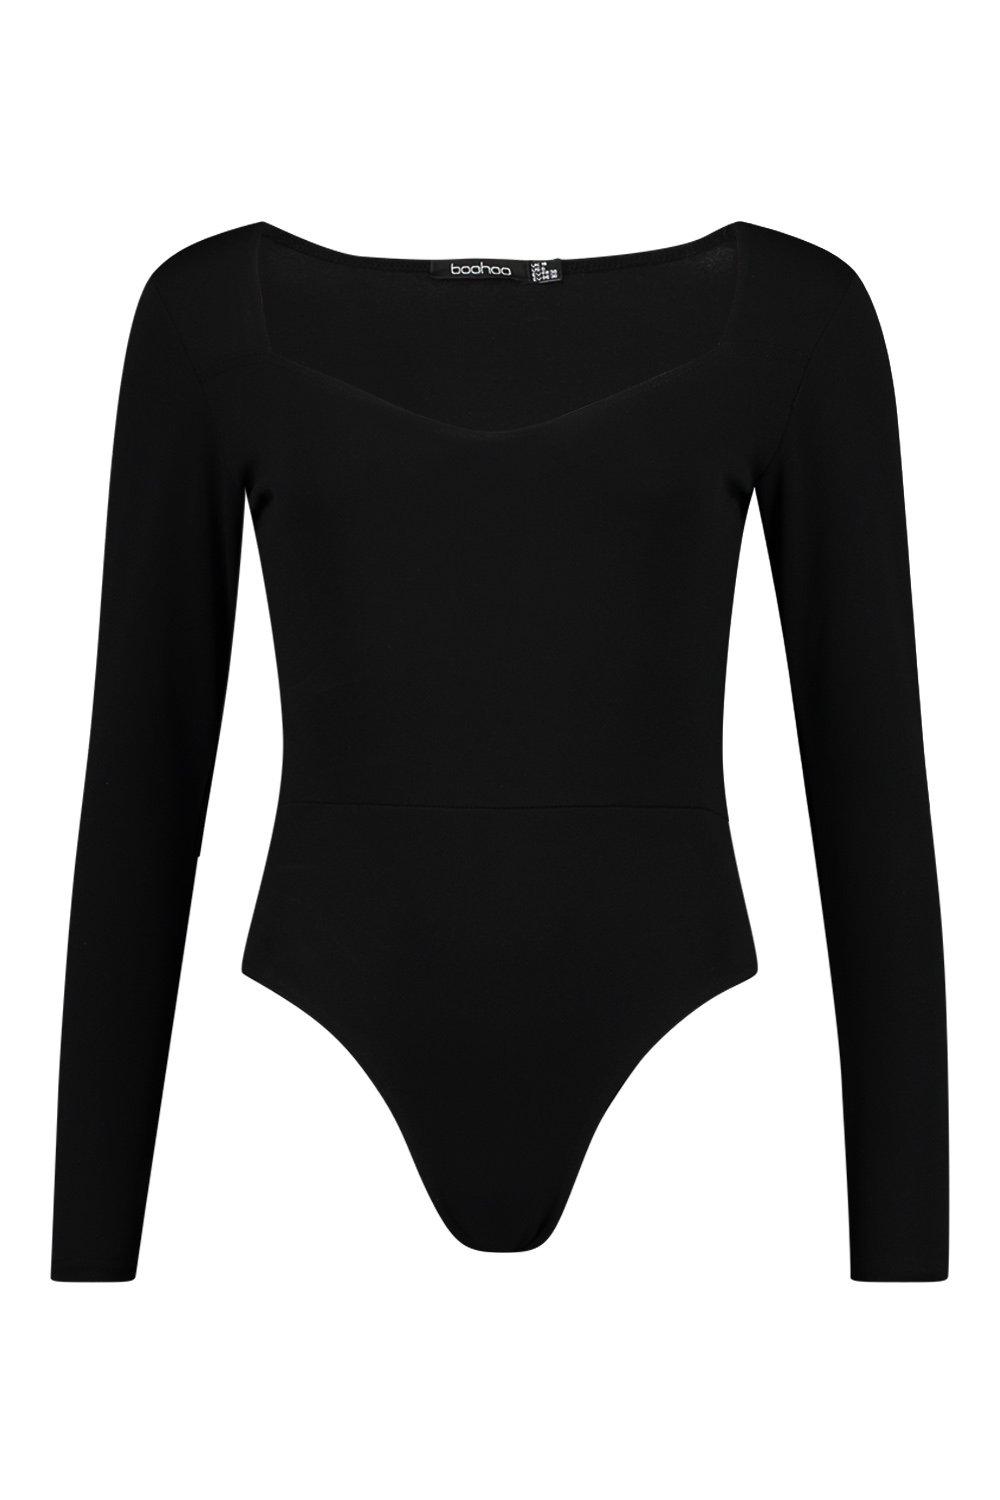  PUMIEY Black Bodysuits for Women Long Sleeve Sweetheart Neck  Body Suits T Shirt Tops, Jet Black X-Small : Clothing, Shoes & Jewelry